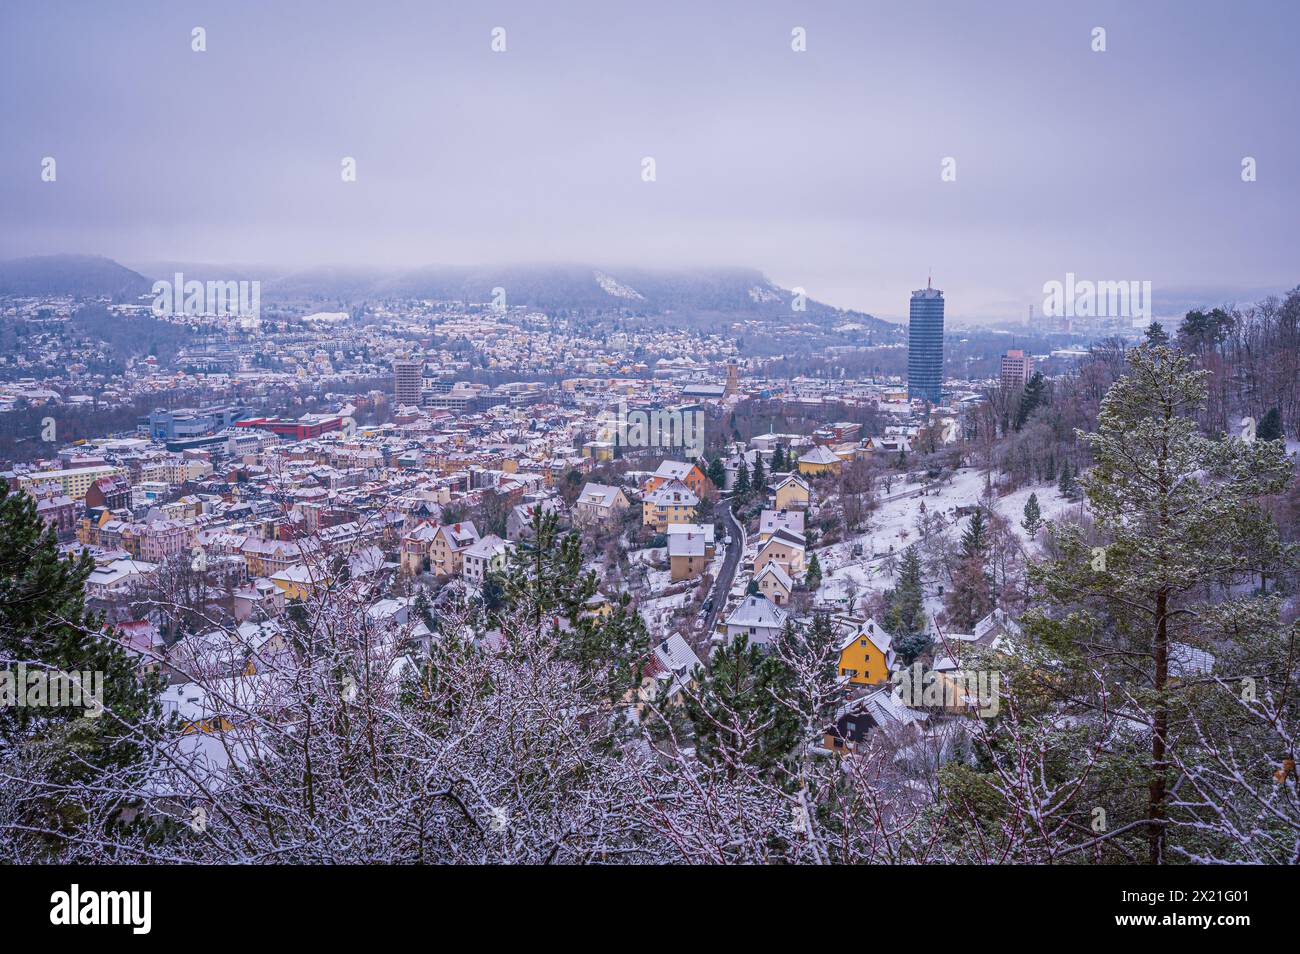 Jena in winter with the Jentower in the city center under a cloudy sky, Jena, Thuringia, Germany Stock Photo